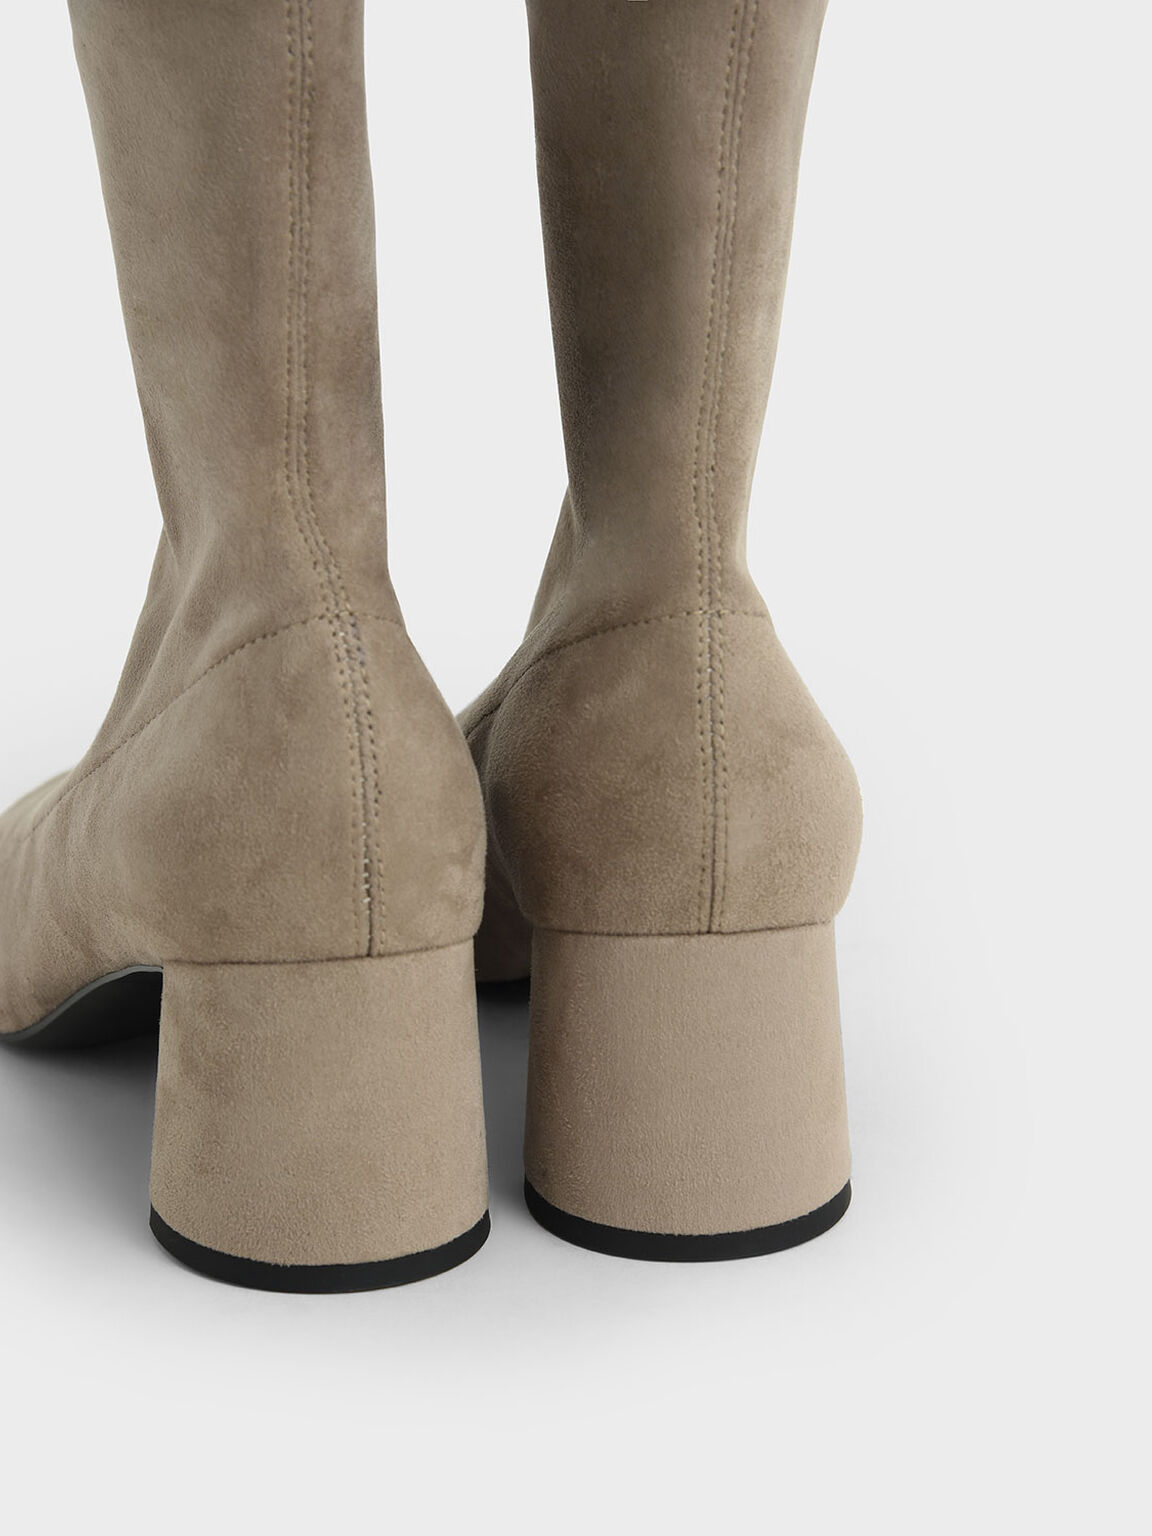 Textured Sculptural Heel Ankle Boots, Taupe, hi-res